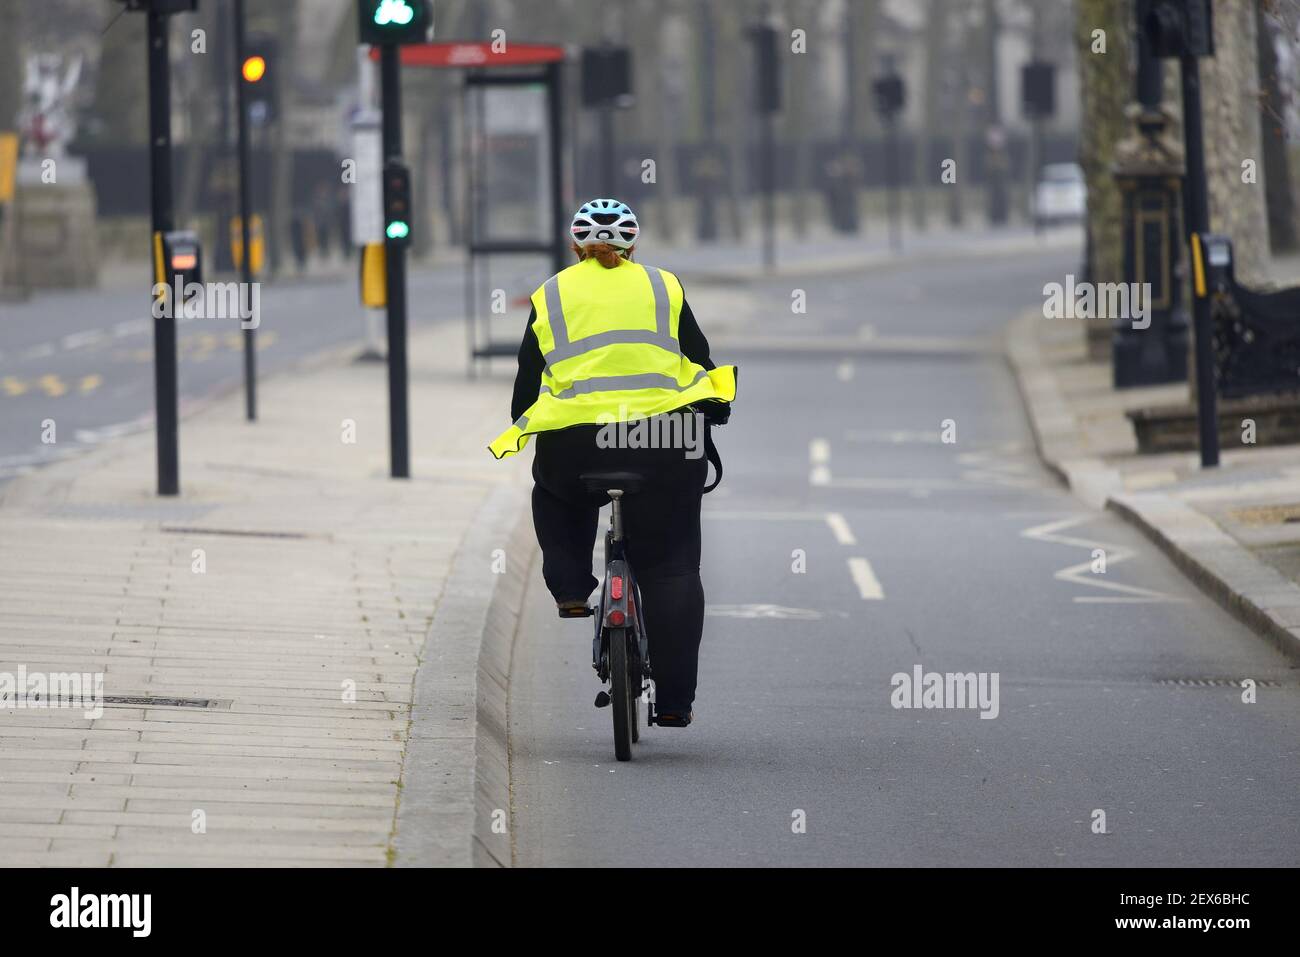 London, England, UK. Woman in Hi-vis jacket on a bike in a cycle lane, Victoria Embankment Stock Photo